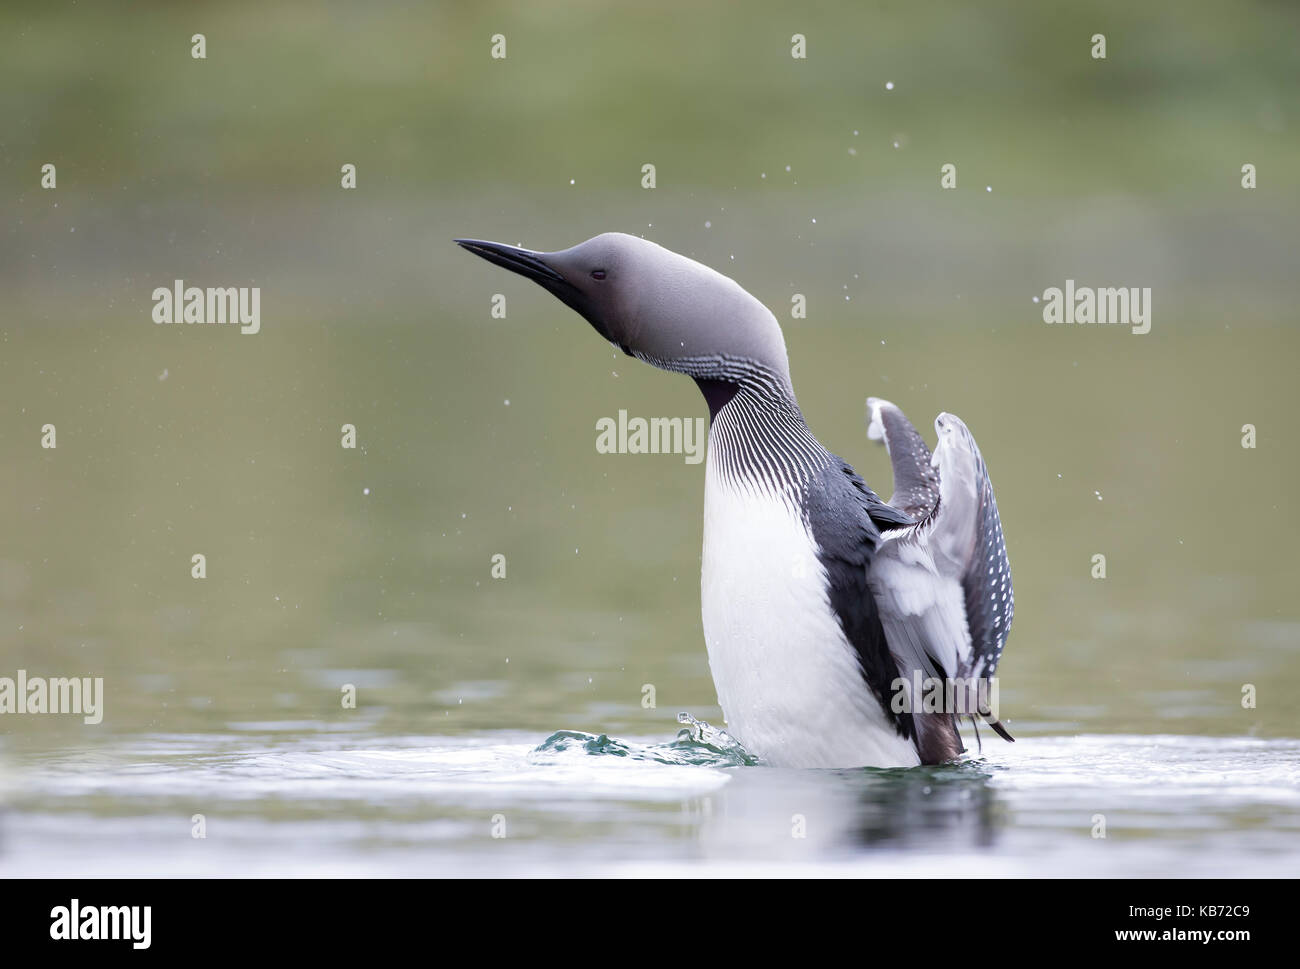 Black-throated Diver (Gavia arctica)  flapping wings on water, Norway, Sor-Trondelag Stock Photo